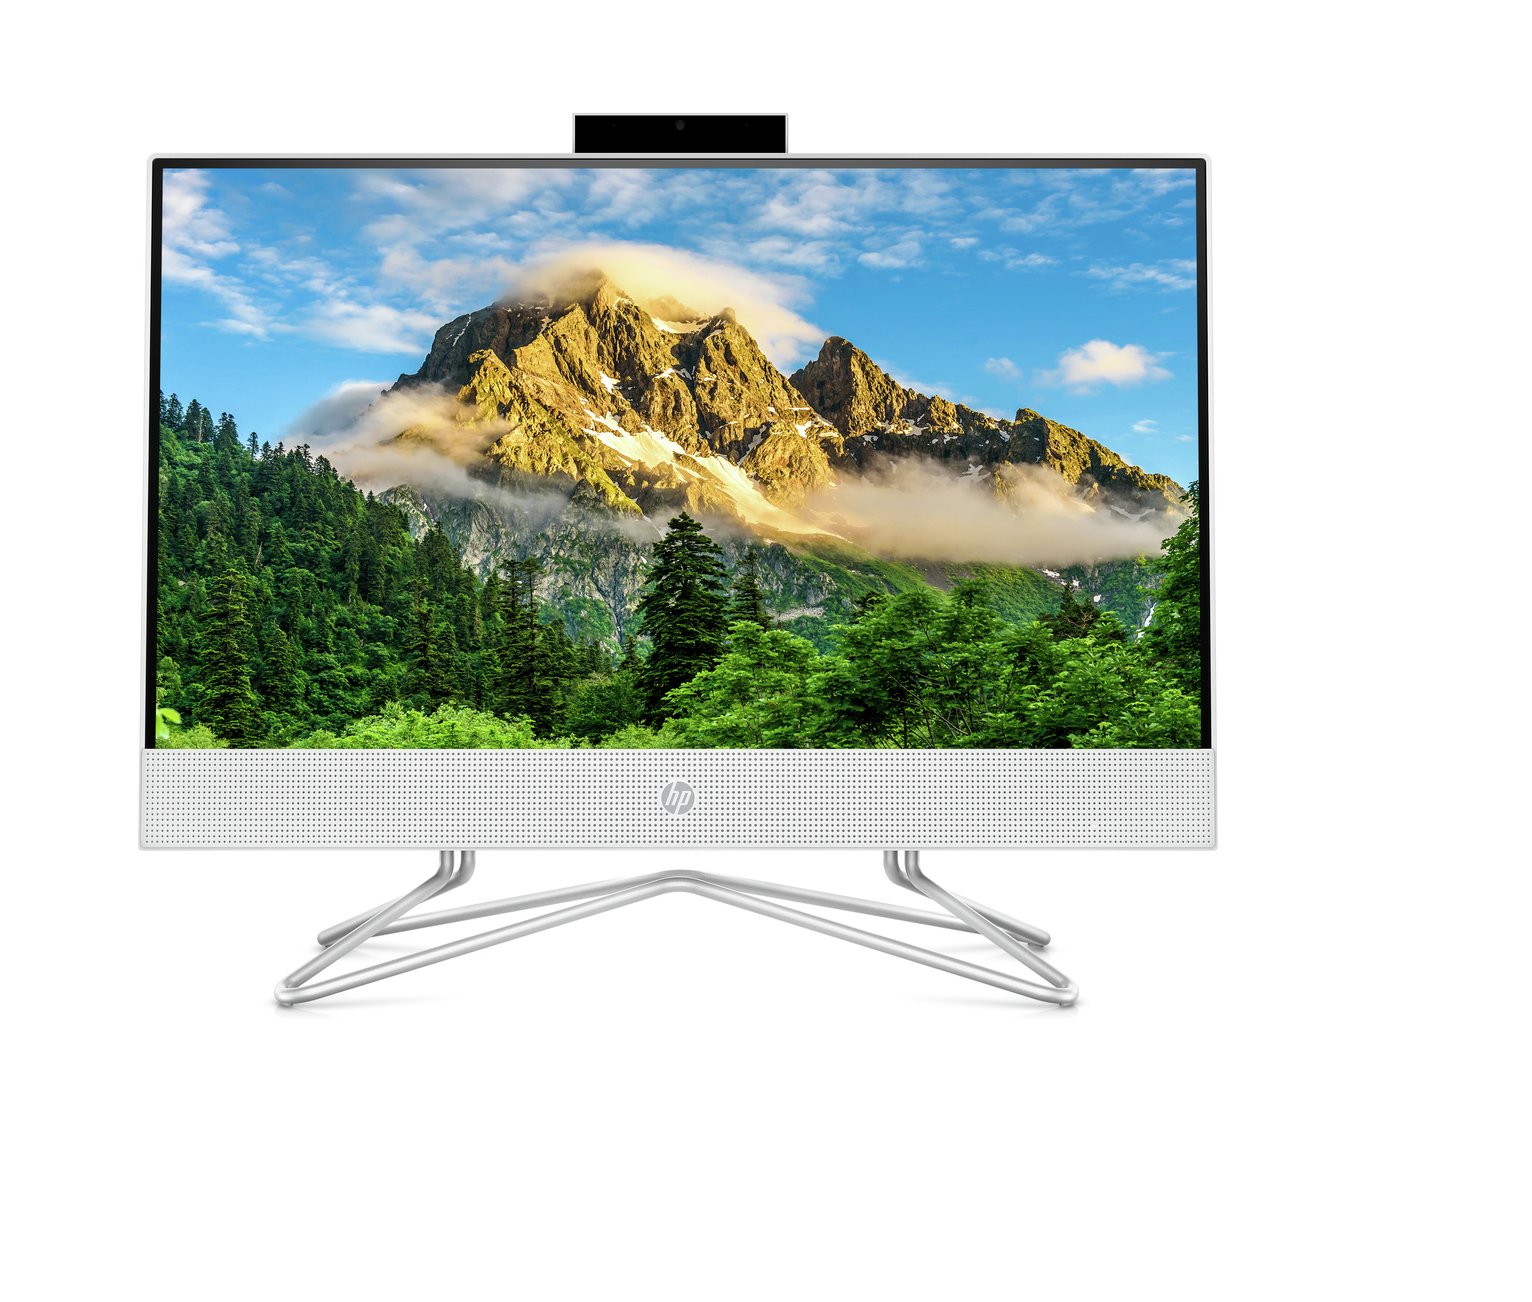 HP 22in Celeron 4GB 128GB FHD All-in-One PC Review